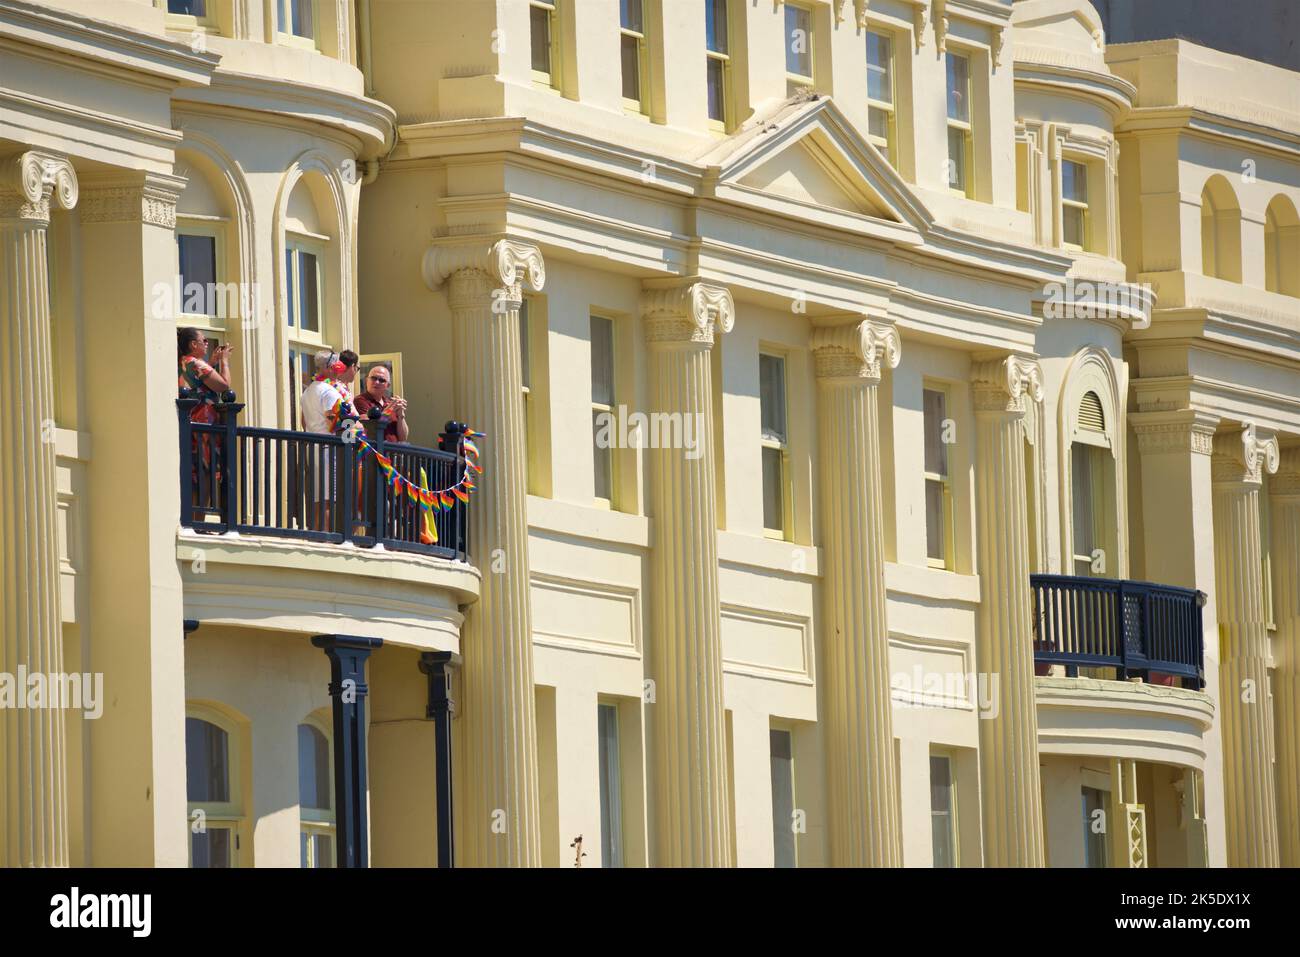 Brighton & Hove Pride Festival, Brighton & Hove, East Sussex, England. Locals looking on from the Regency architecture of Brunswick Terrace, Hove. Stock Photo